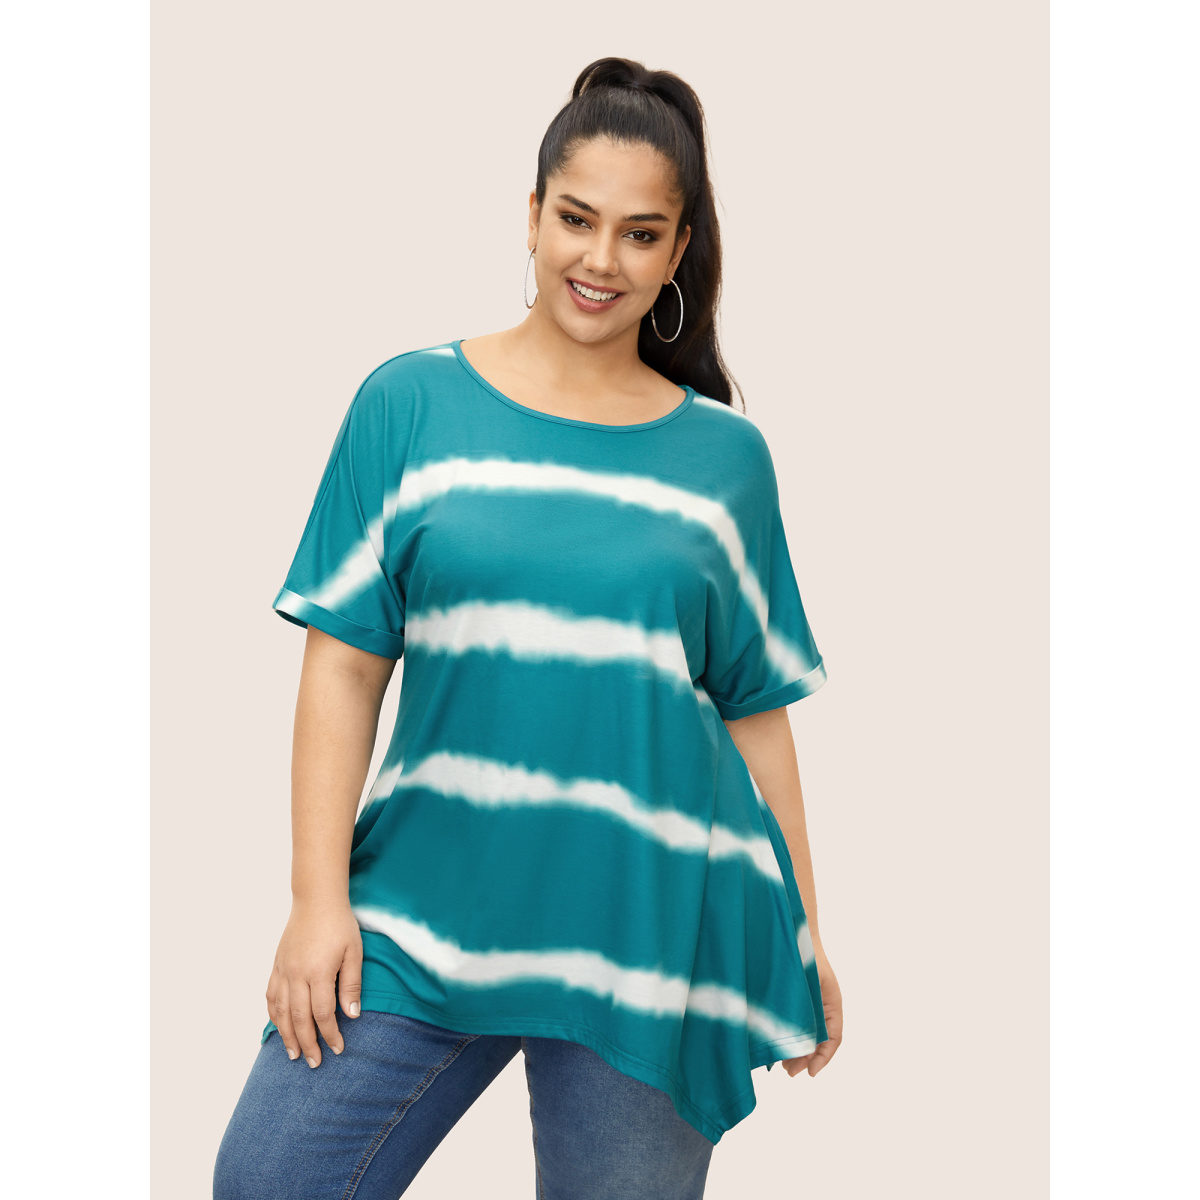 

Plus Size Round Neck Gradient Dyeing Cuffed Sleeve T-shirt Teal Women Casual Contrast Round Neck Everyday T-shirts BloomChic